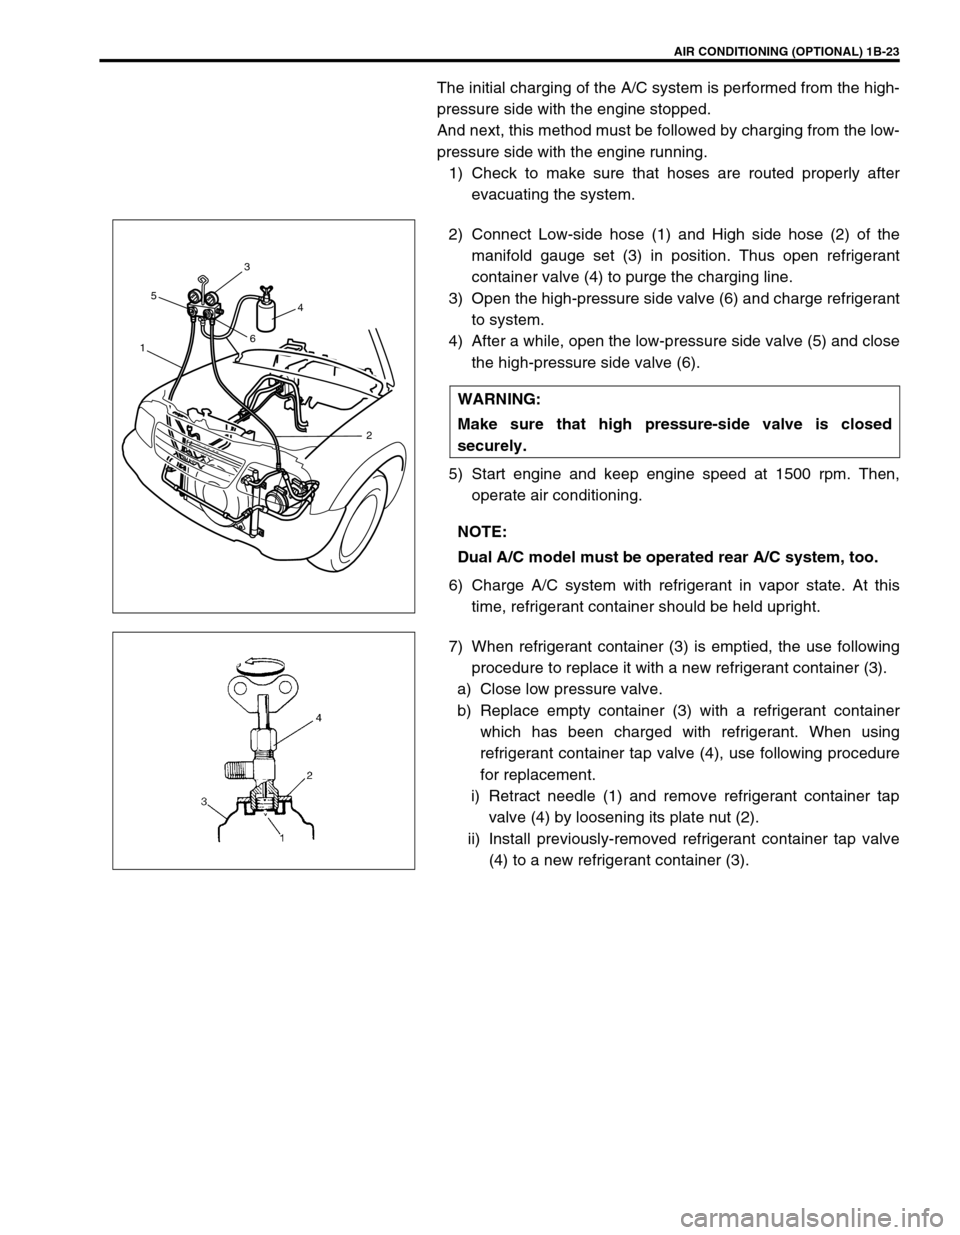 SUZUKI GRAND VITARA 2001 2.G User Guide AIR CONDITIONING (OPTIONAL) 1B-23
The initial charging of the A/C system is performed from the high-
pressure side with the engine stopped.
And next, this method must be followed by charging from the 